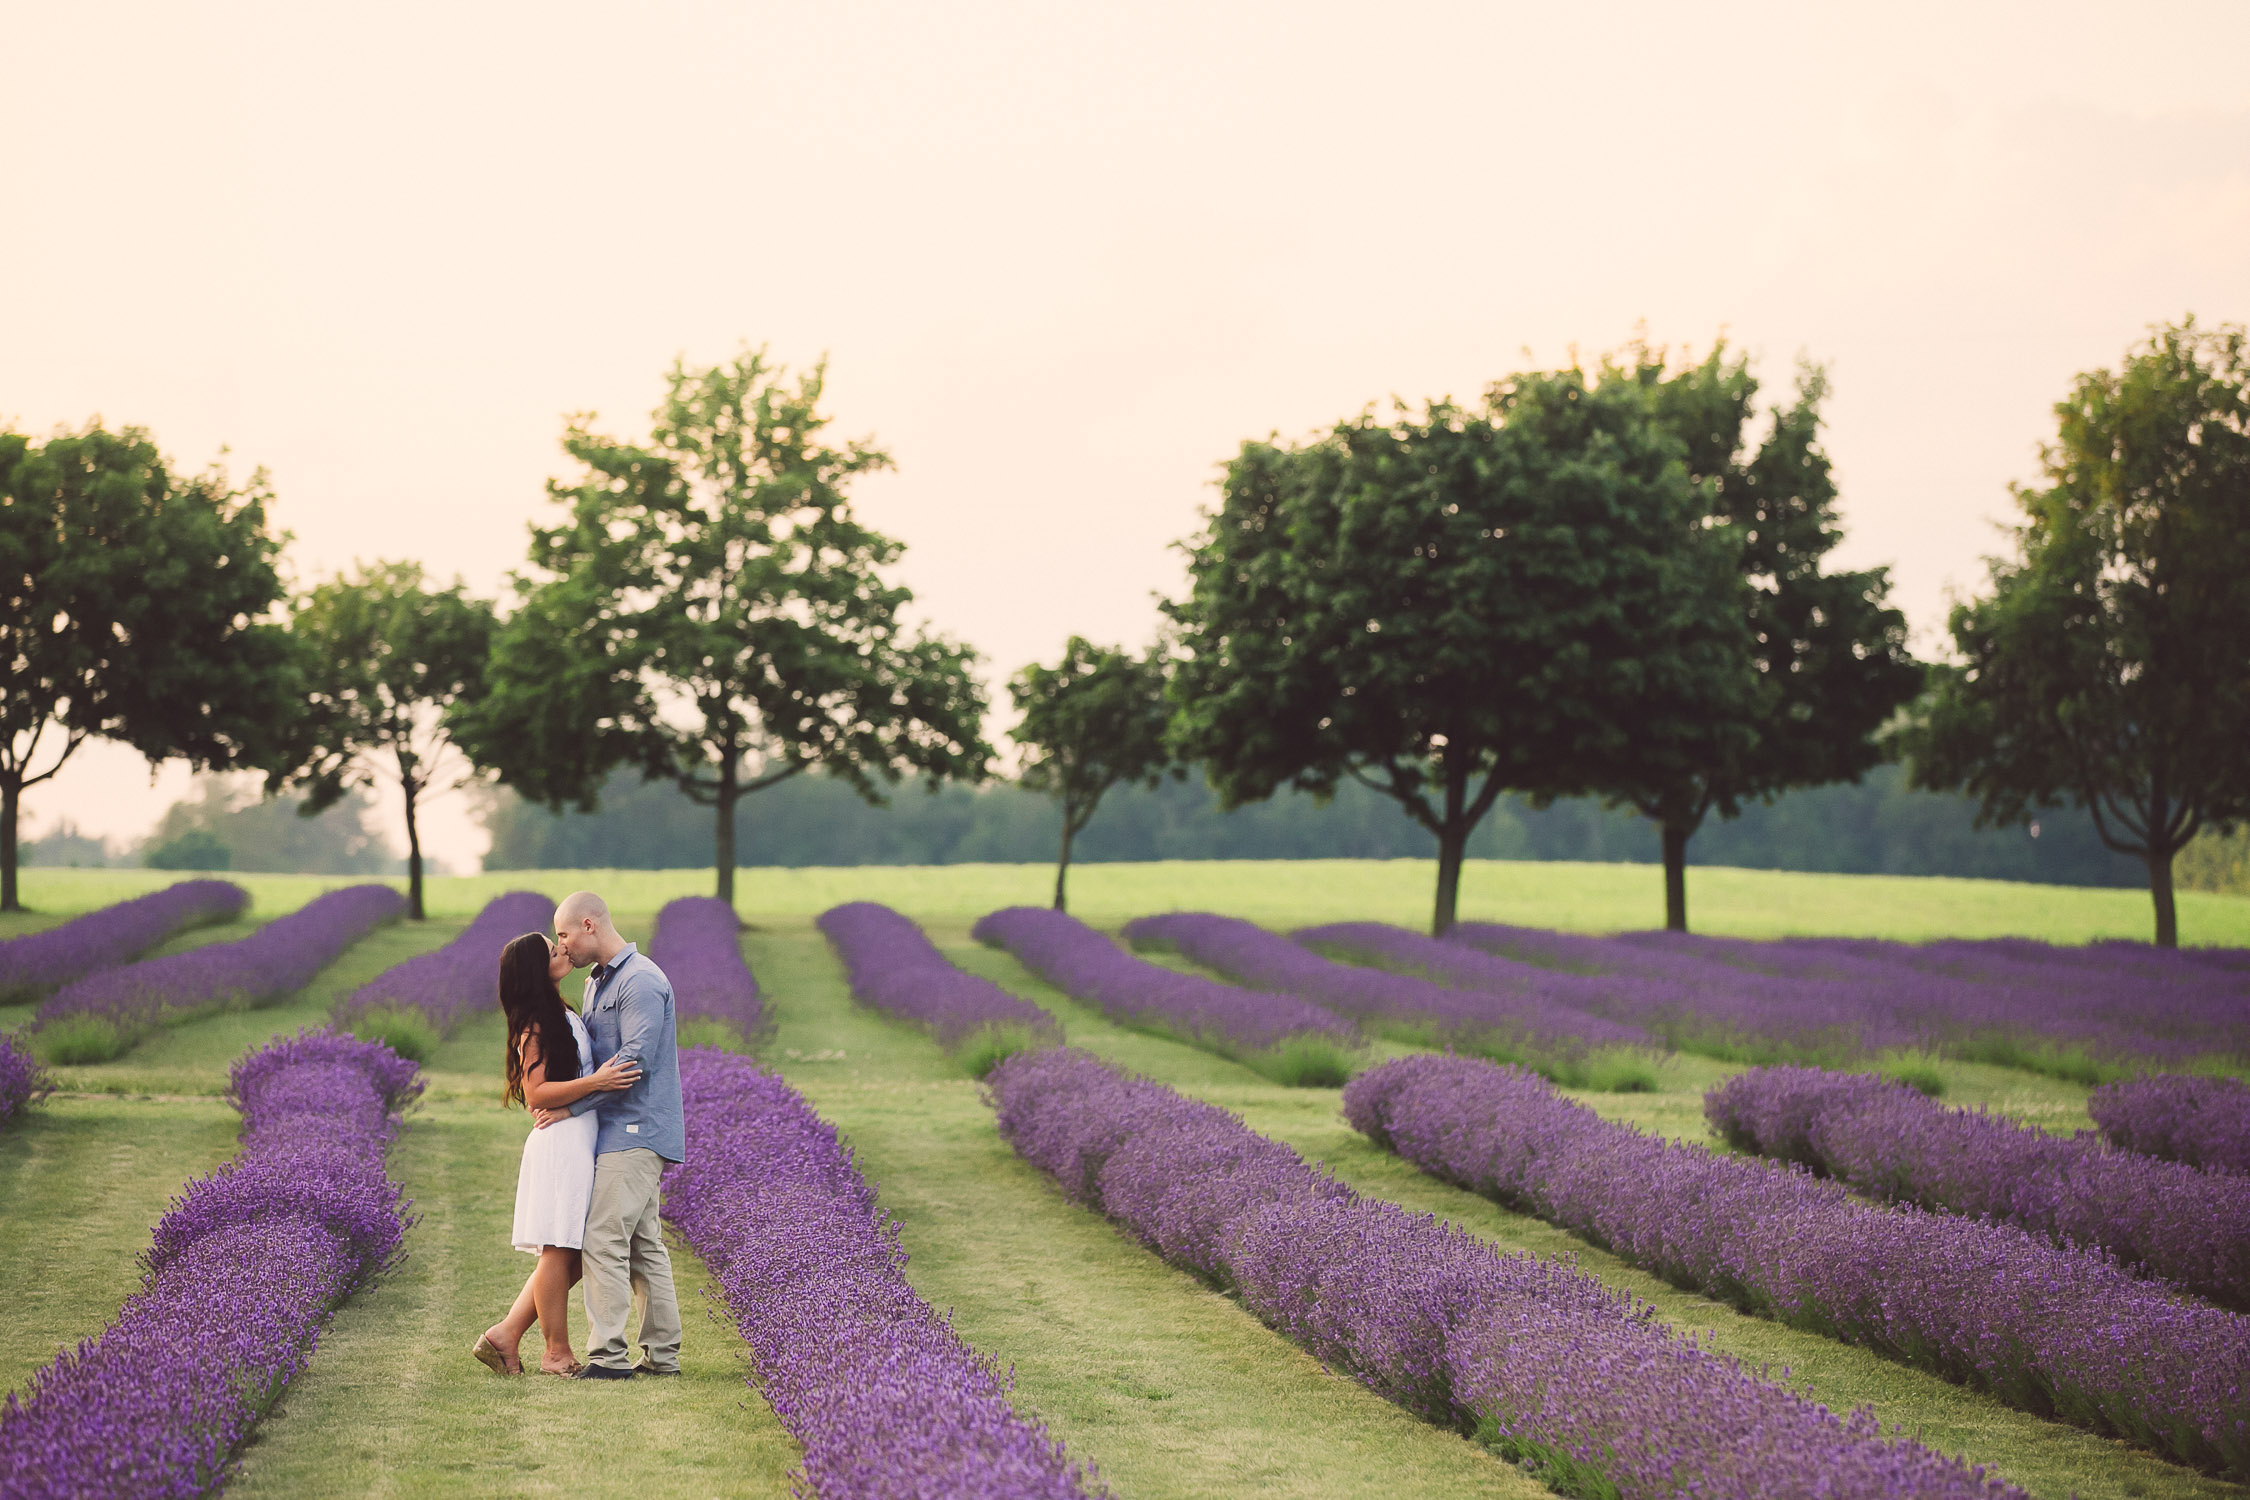 Elegant engagement Photos at a Lavender Farm in Norfolk County.